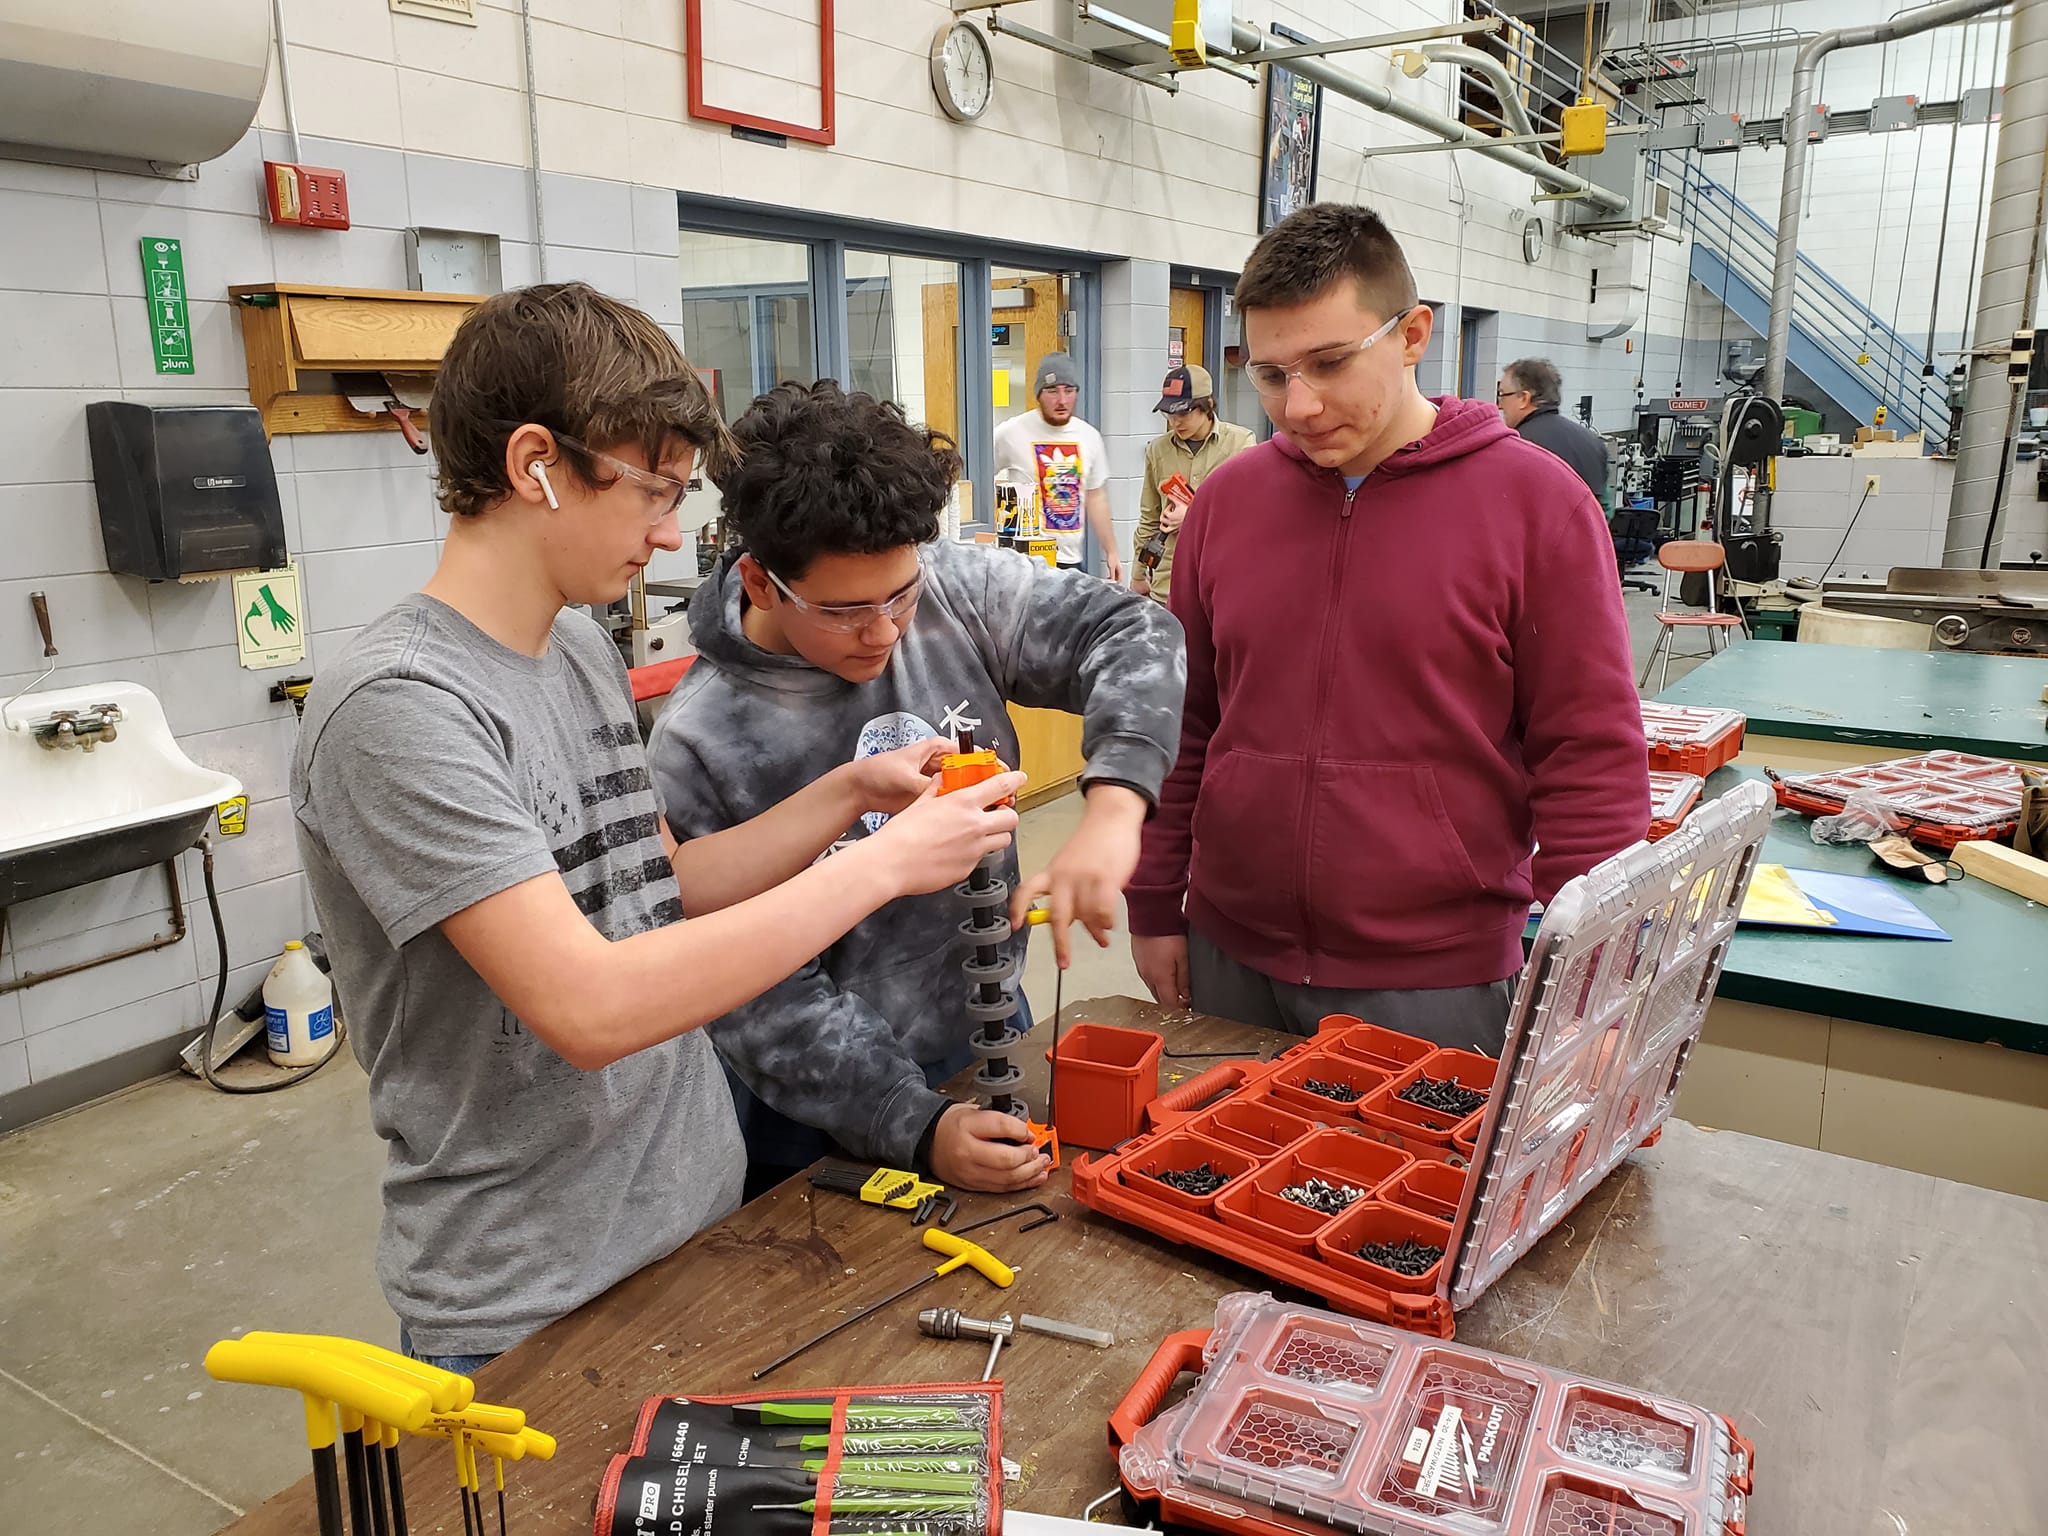 Freshmen Andrew O'Toole, Brolin Cliver, and Luc Pomazak work on a prototype of a robot mechanism